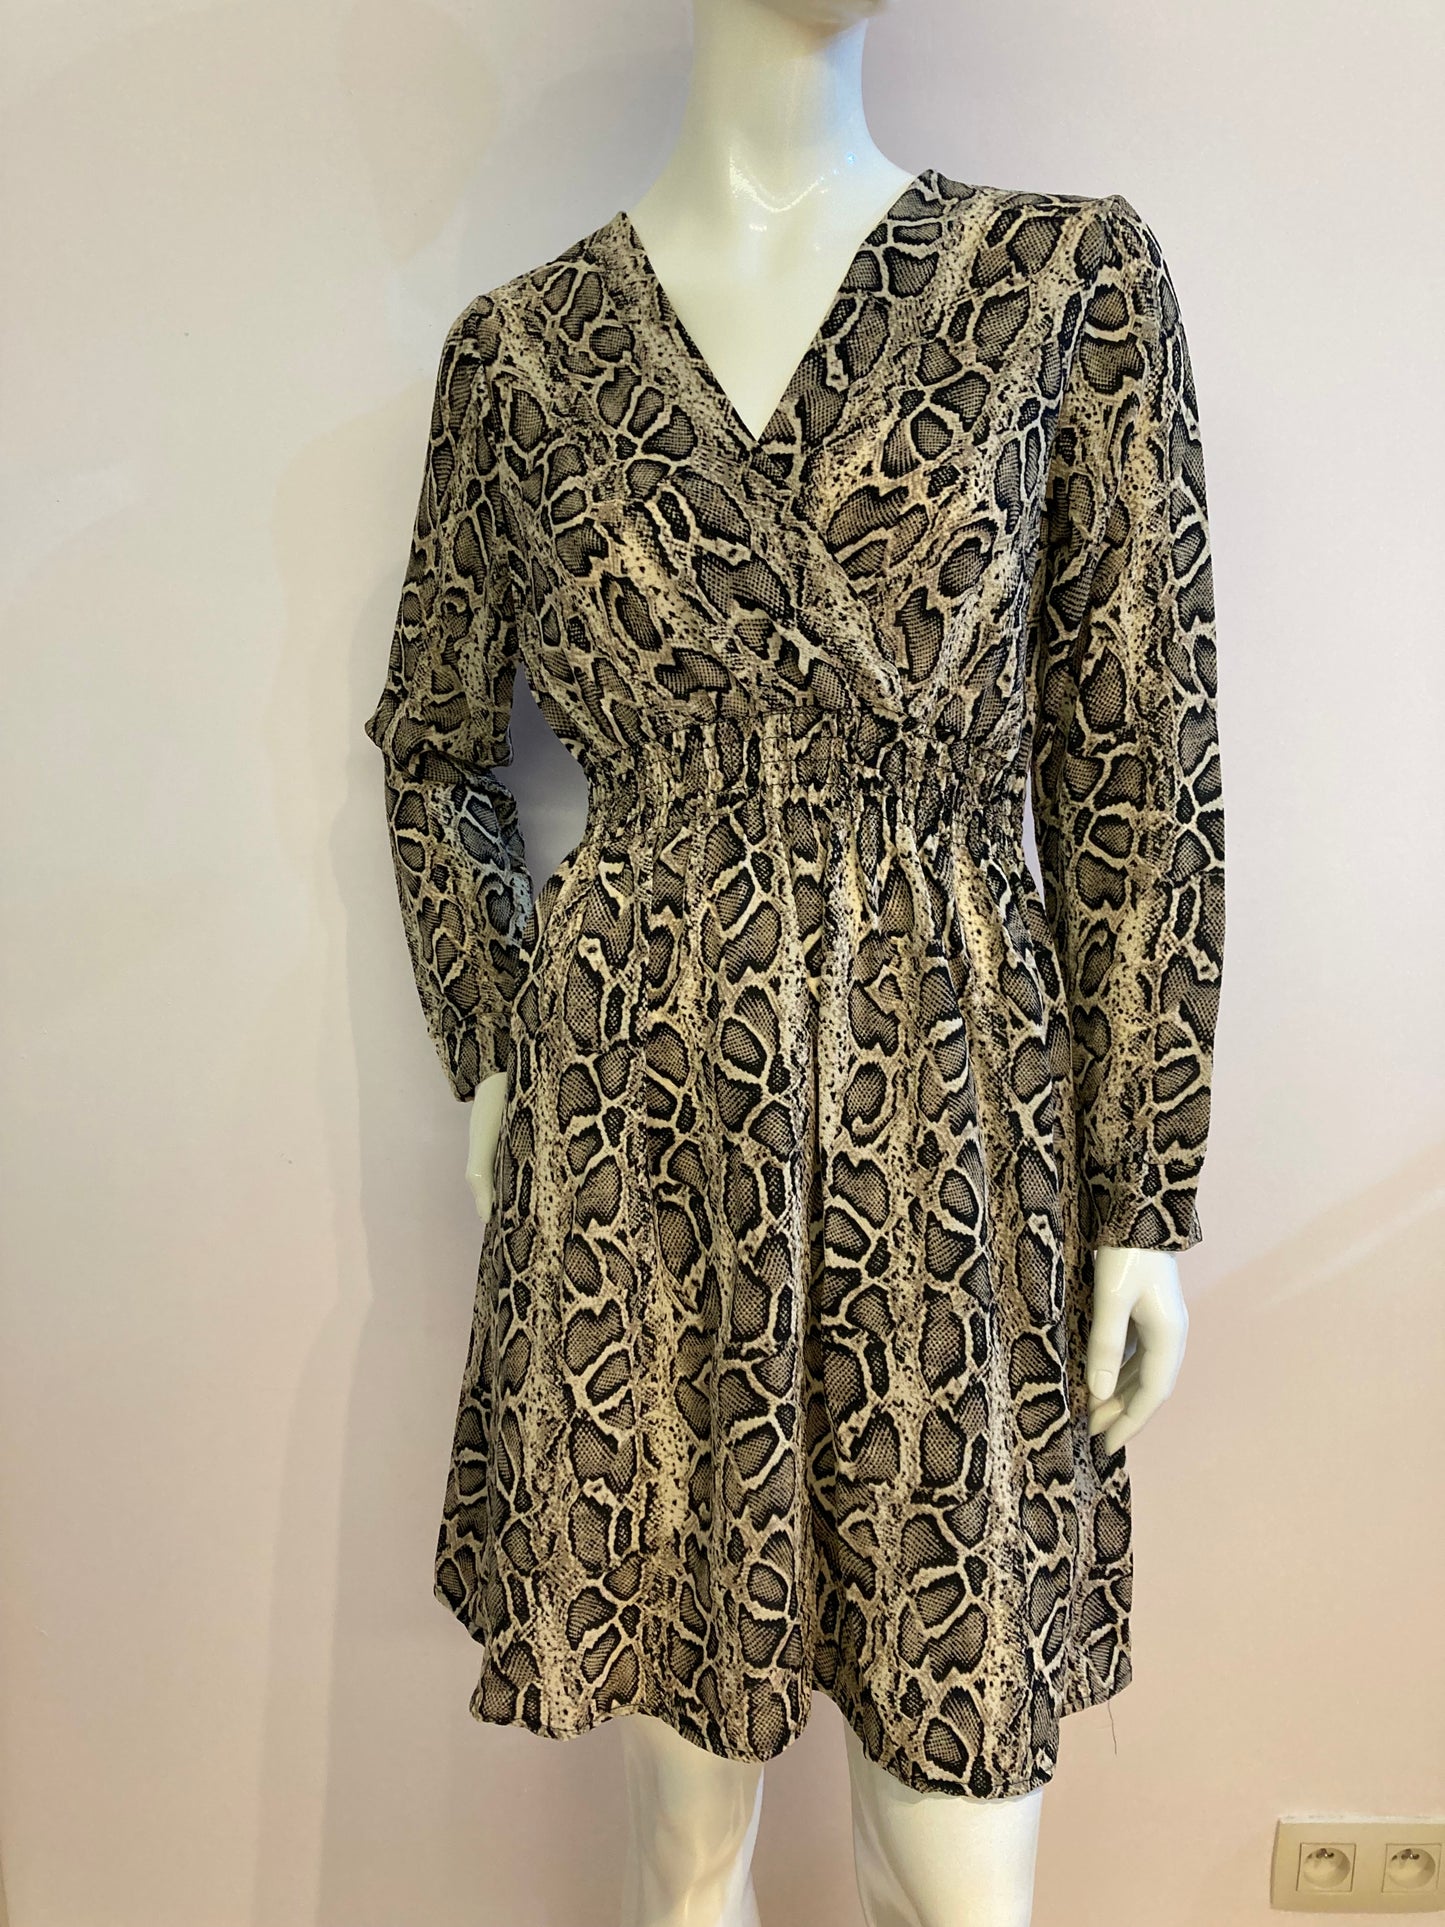 Python print dress crossed at the bust with elastic at the waist